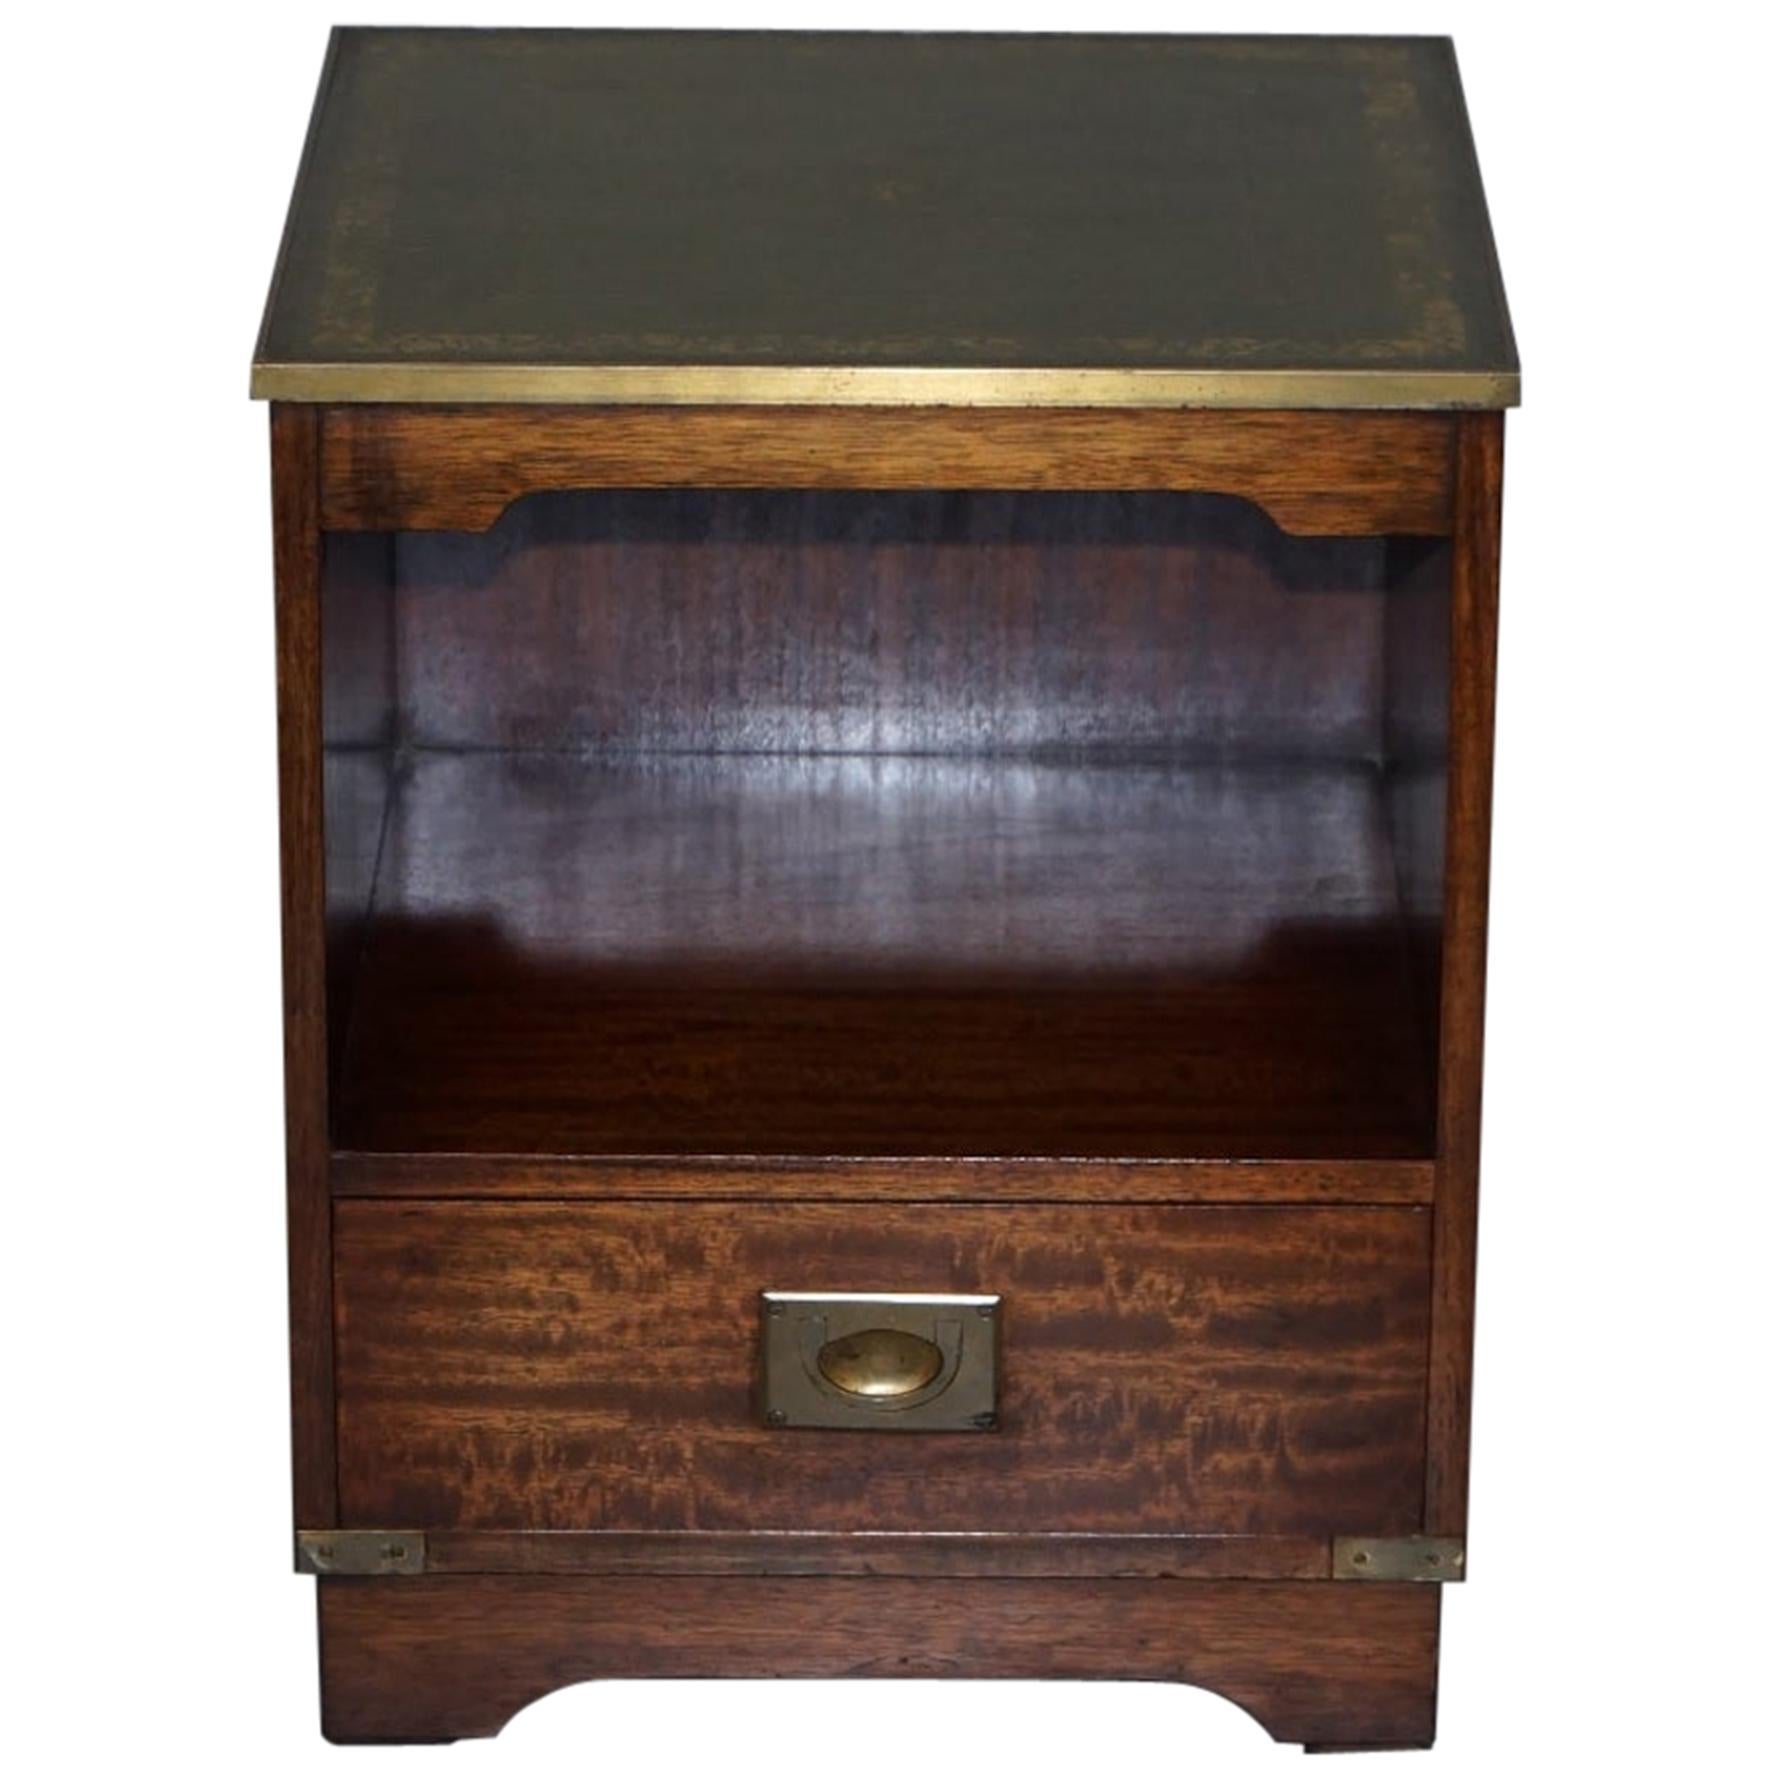 We are delighted to offer for sale this luxury Vintage flamed mahogany, gold leaf embossed green leather top with brass trim Military Campaign bedside lamp or wine table drawers 

This is a very luxurious piece, the frame is solid flamed mahogany